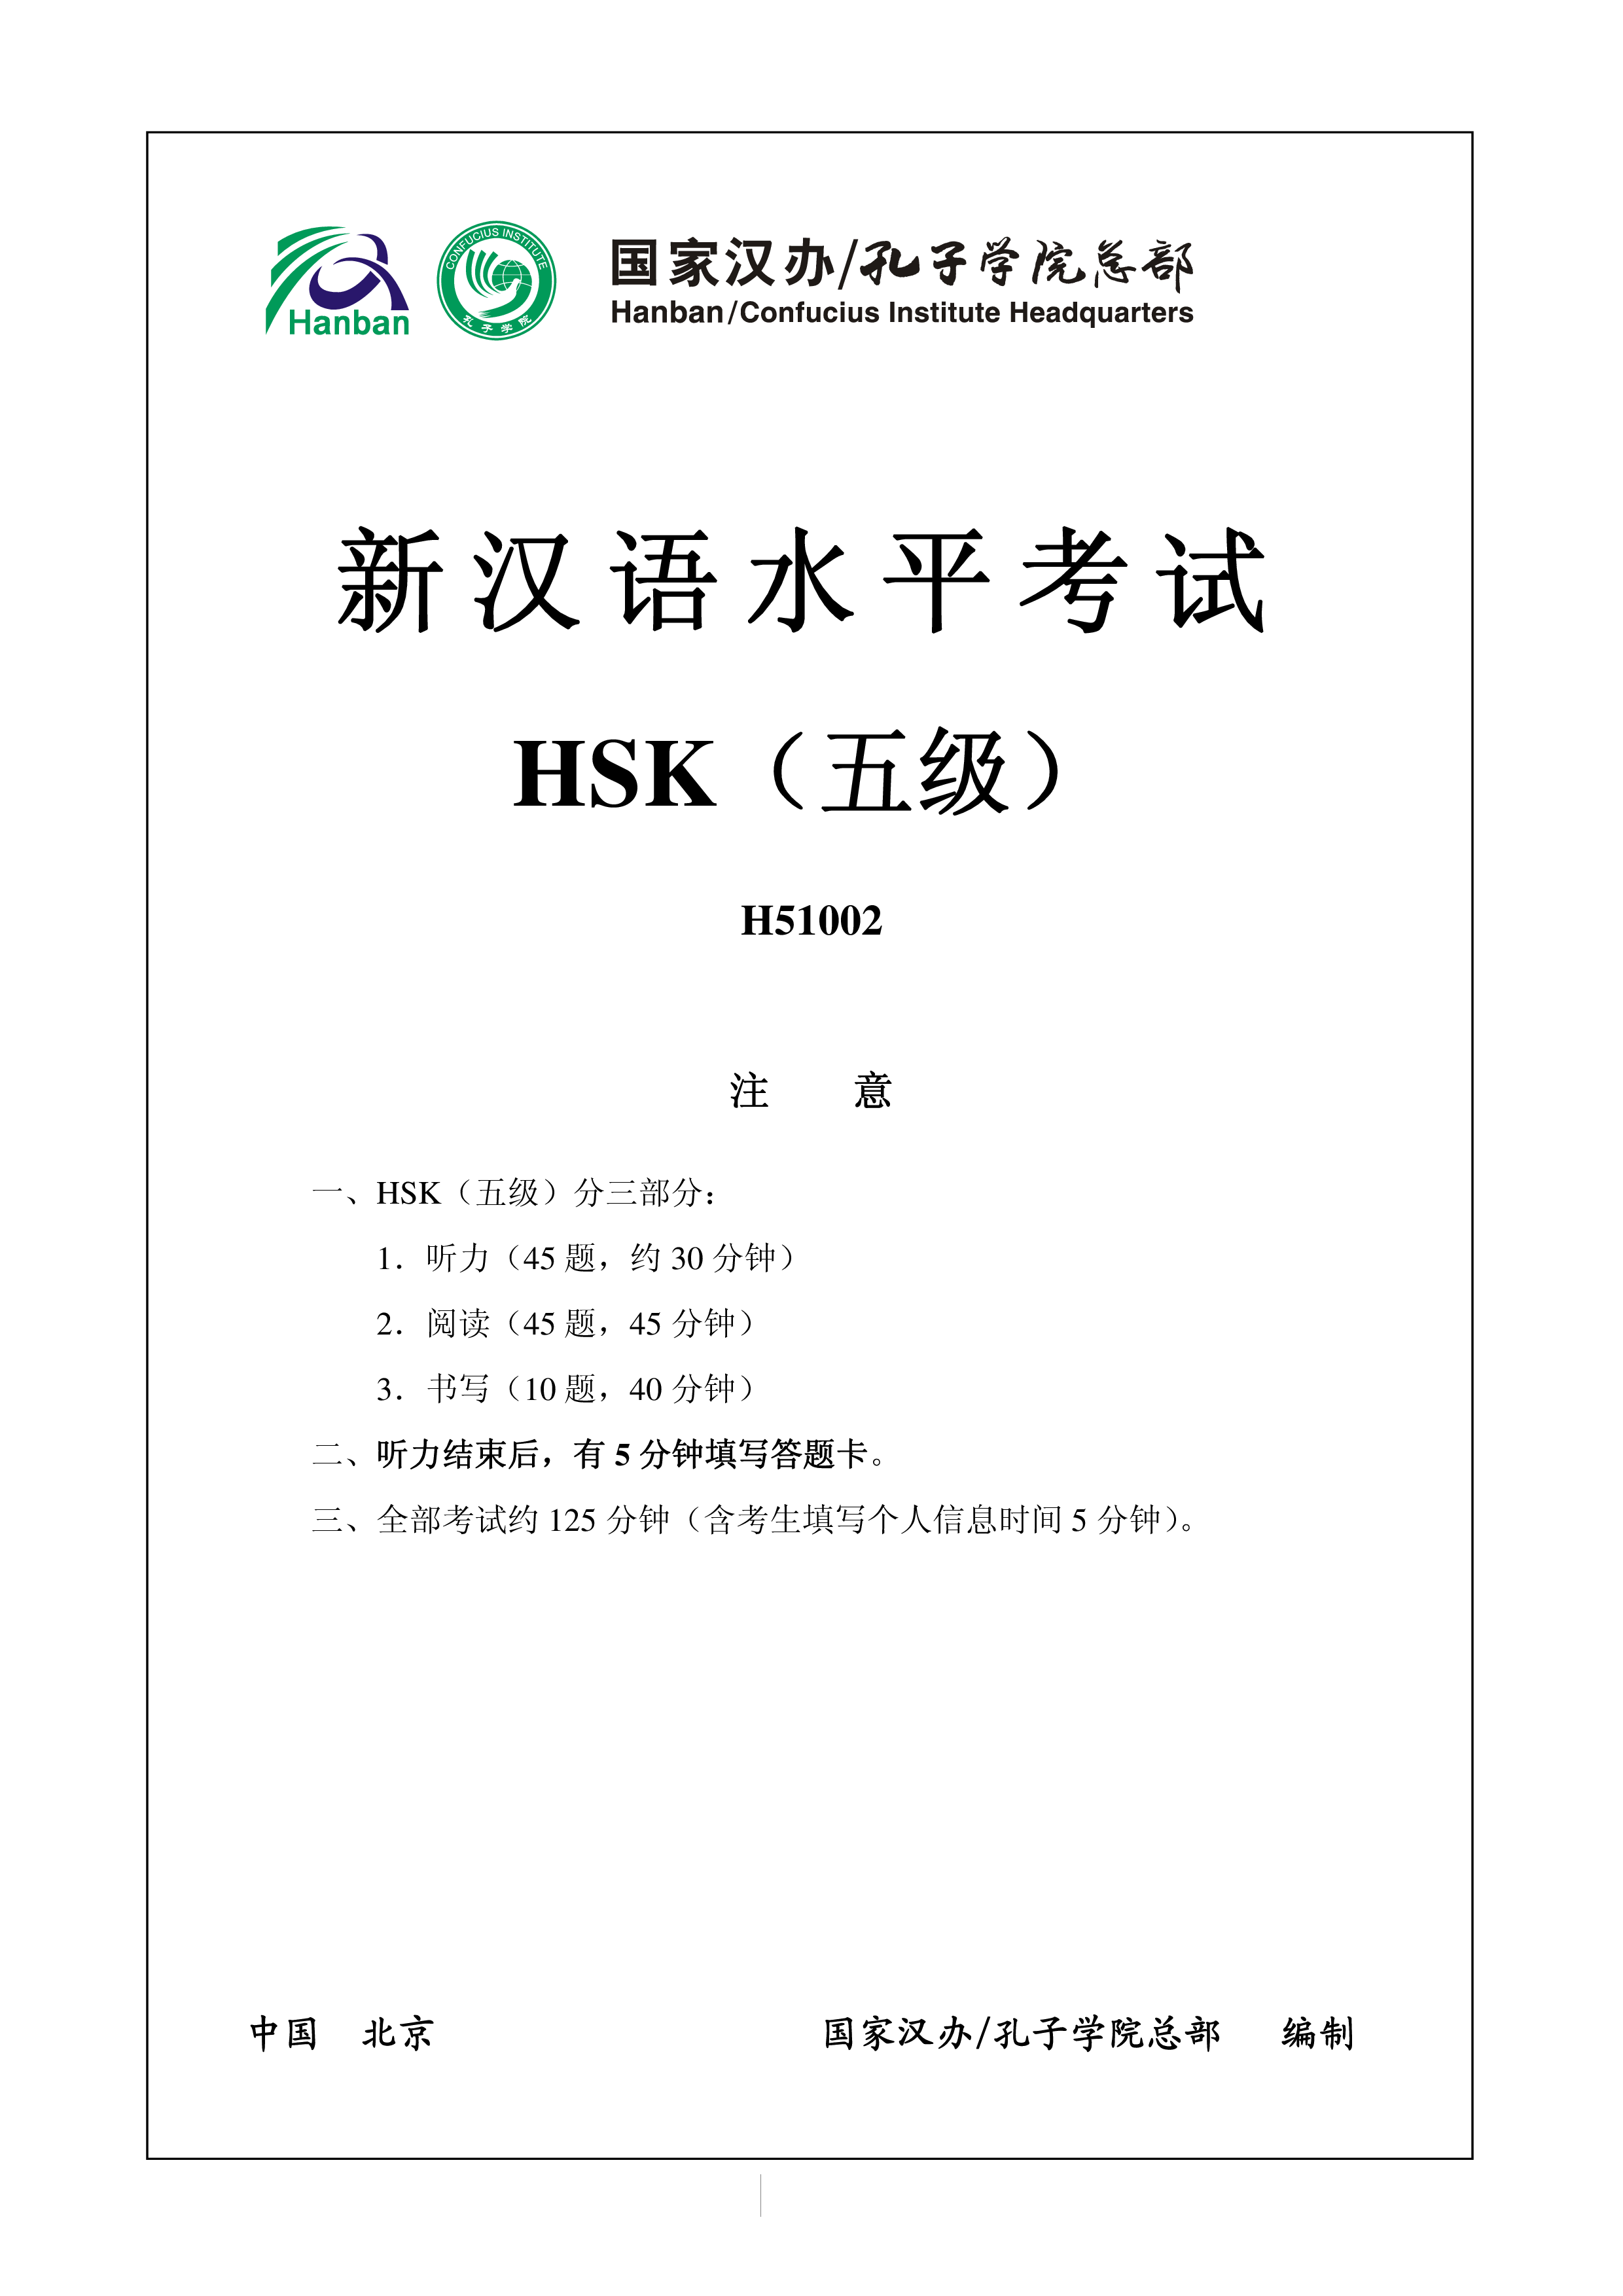 HSK5 H51002 Chinese Exam, including Audio and Answers 模板